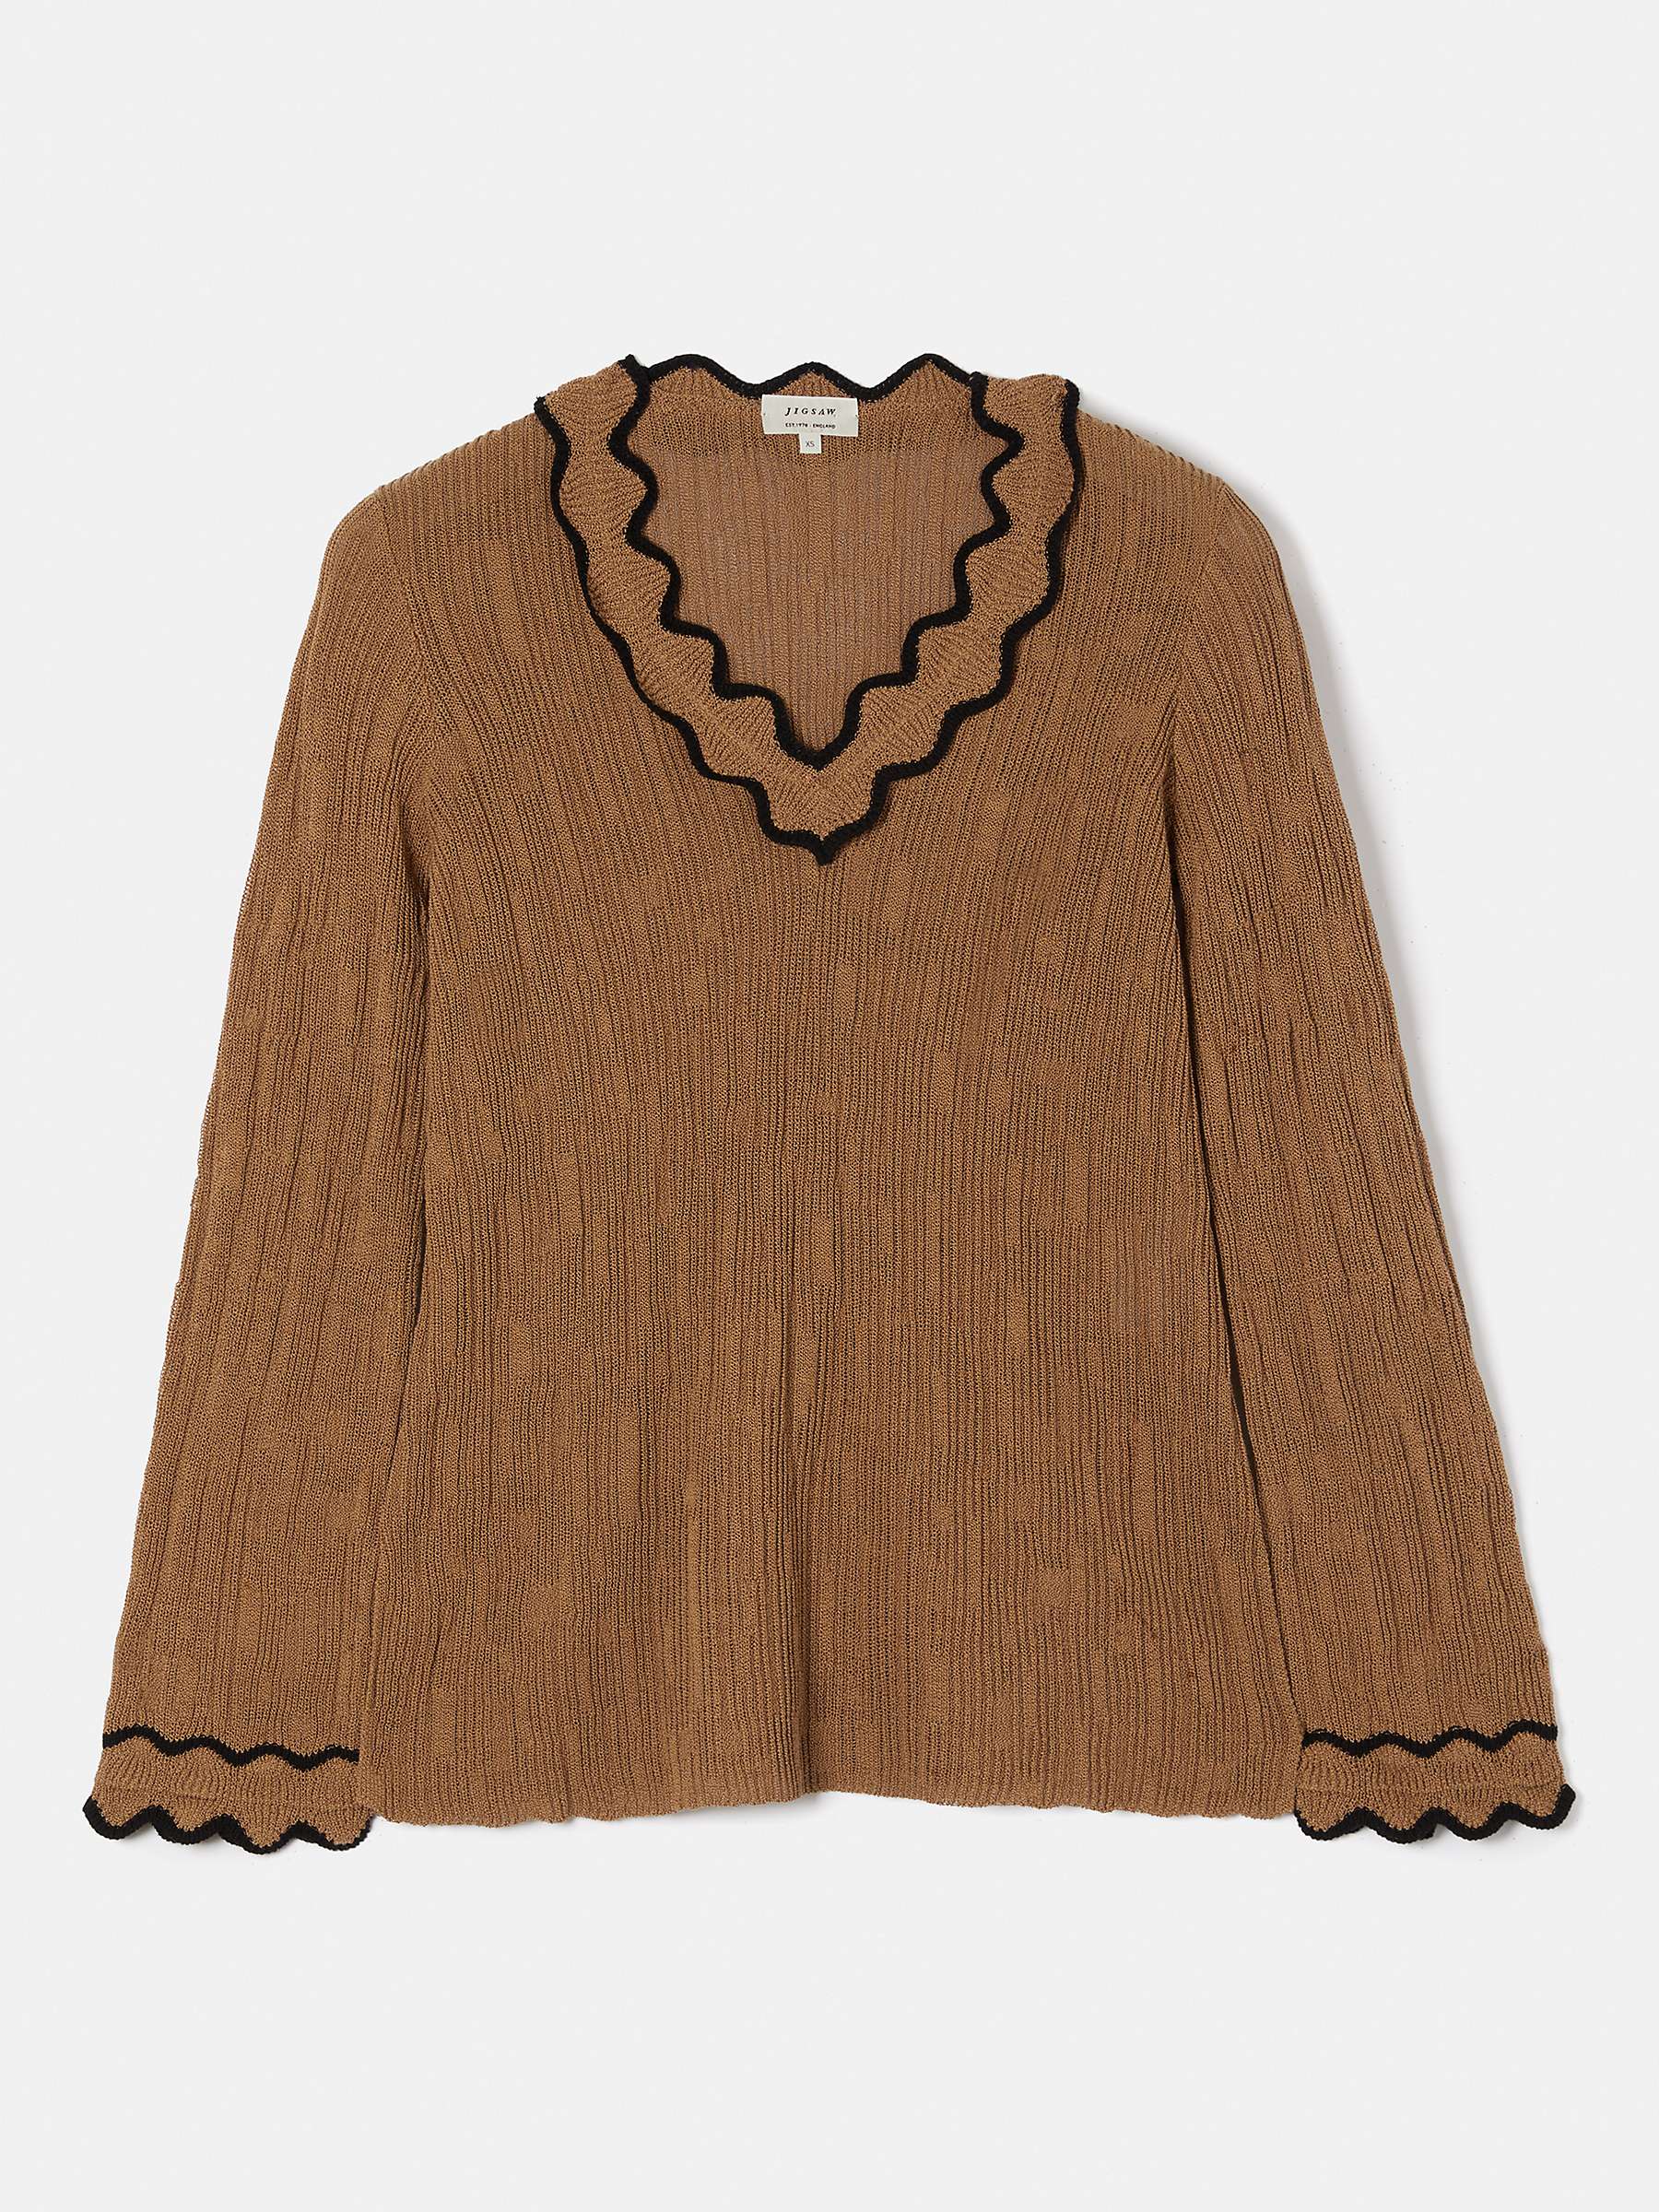 Buy Jigsaw Scallop Textured Top, Brown Online at johnlewis.com